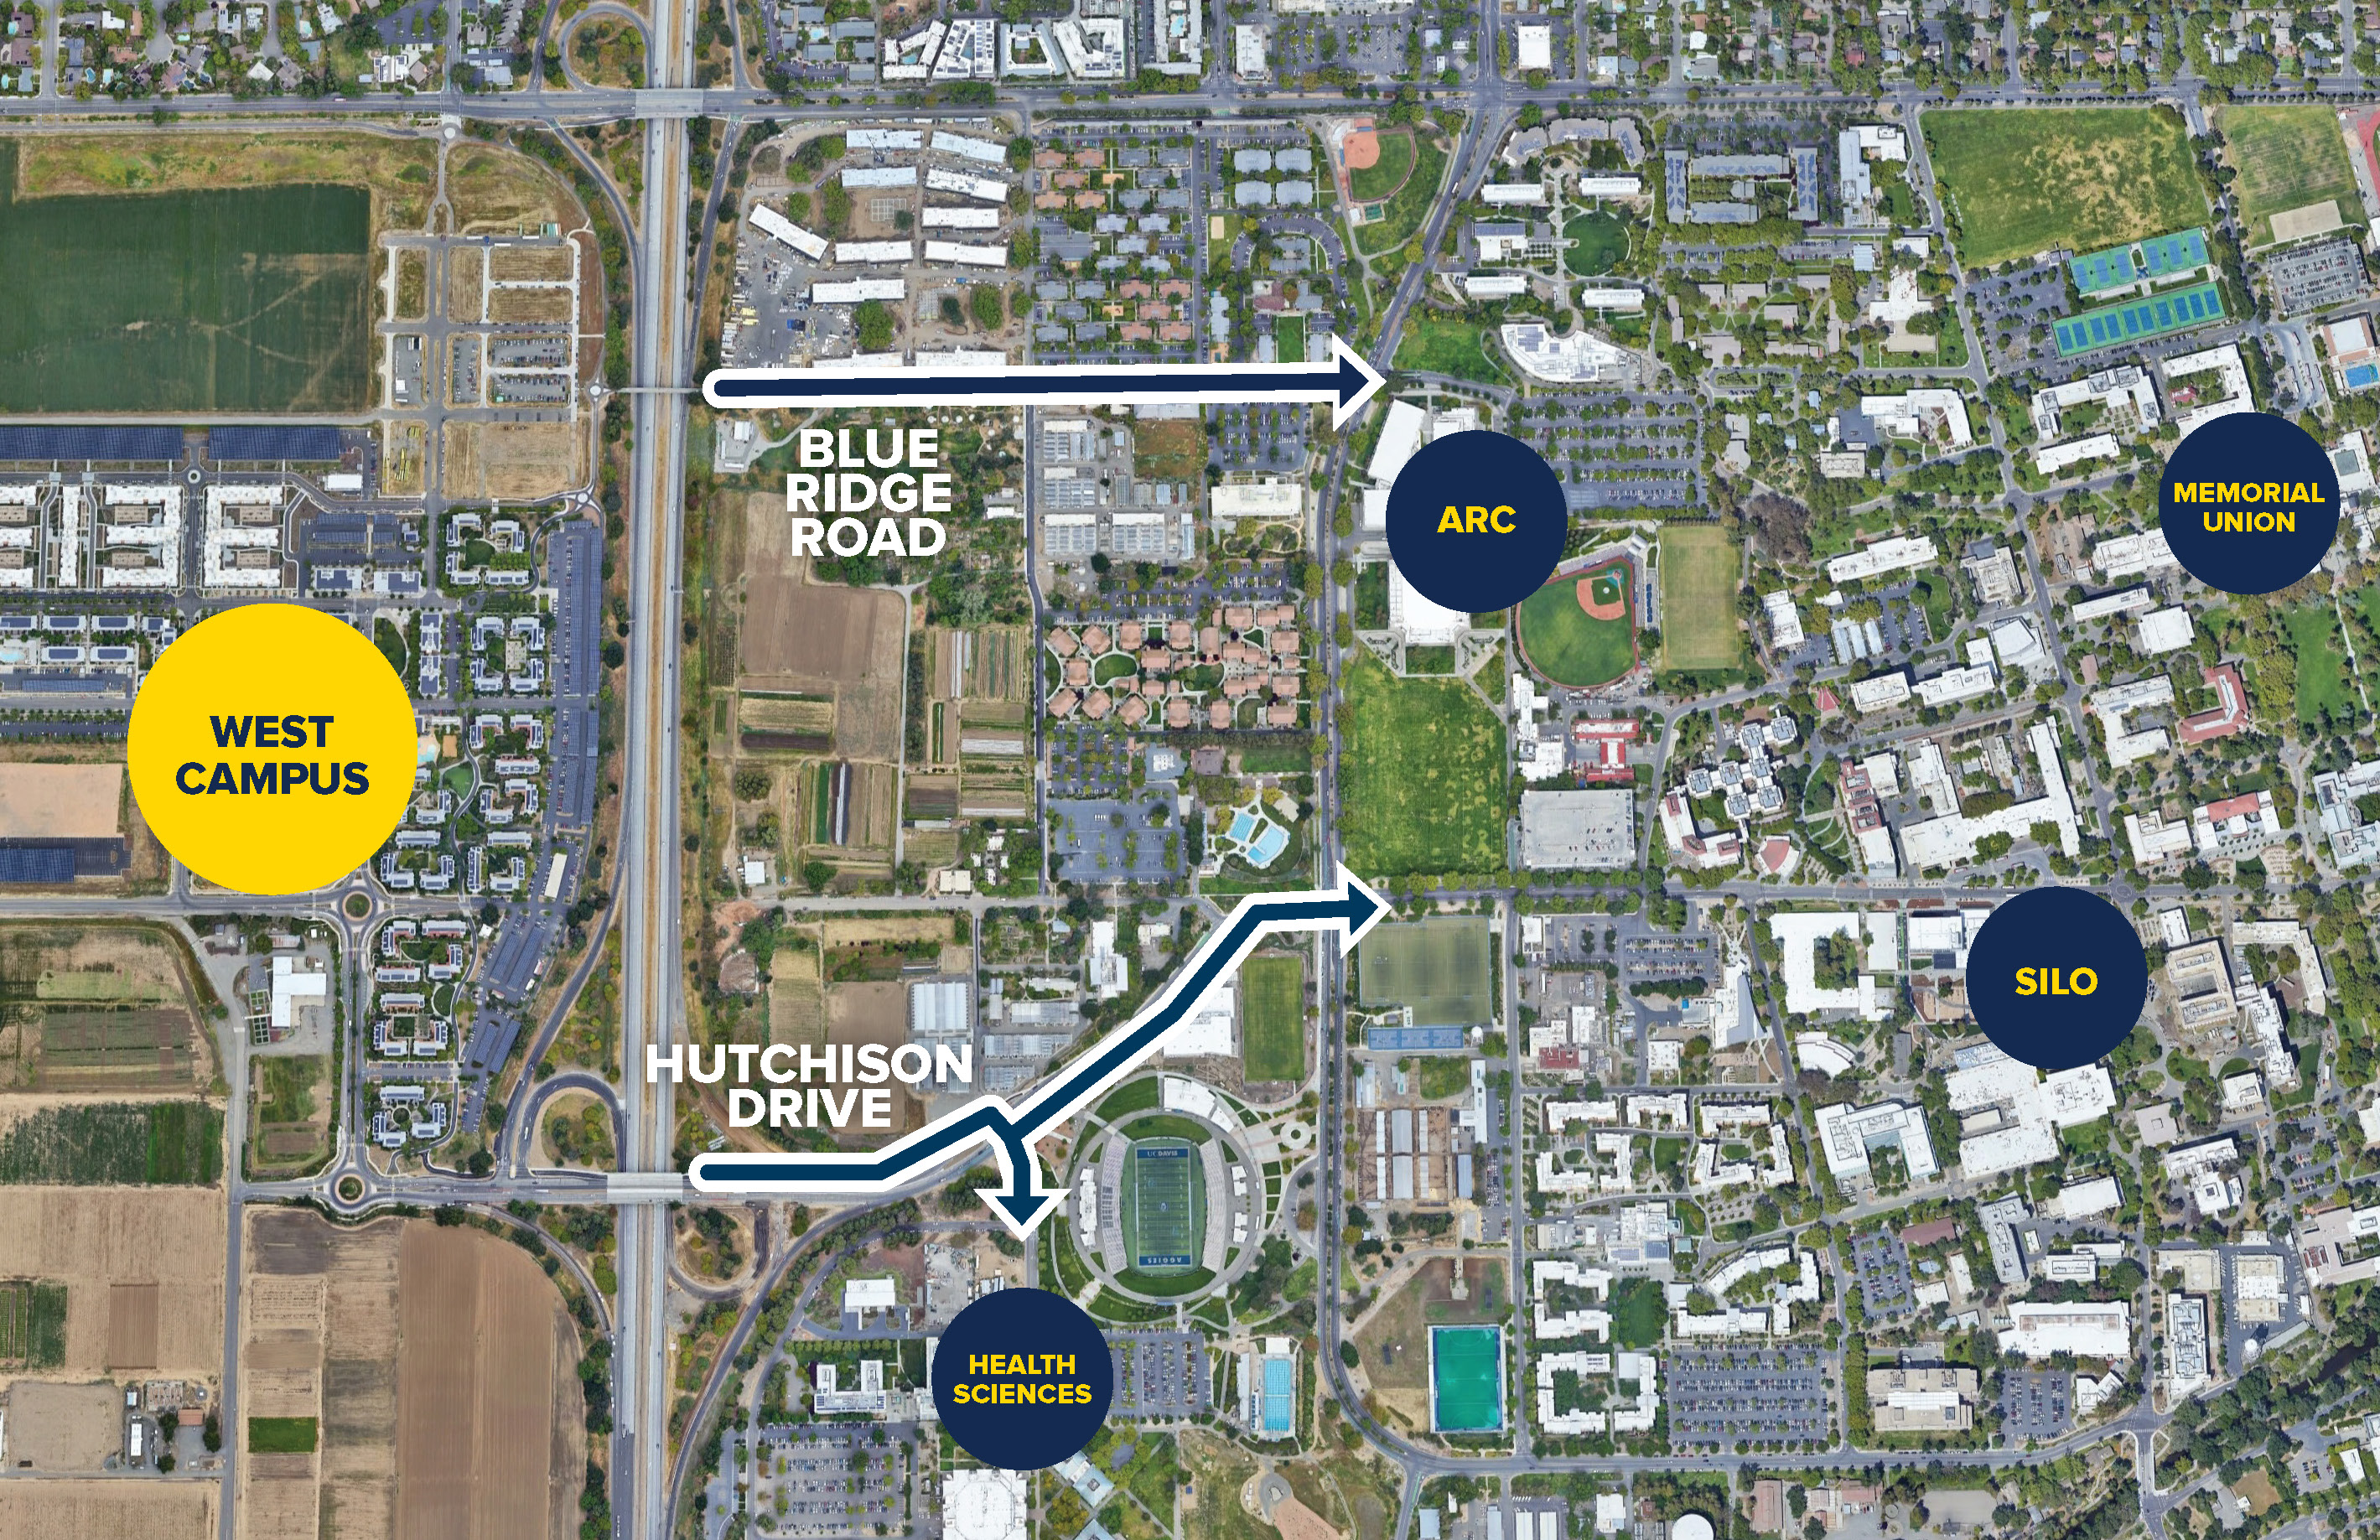 Image of campus with arrows highlighting the routes to get from west campus to different areas on campus.